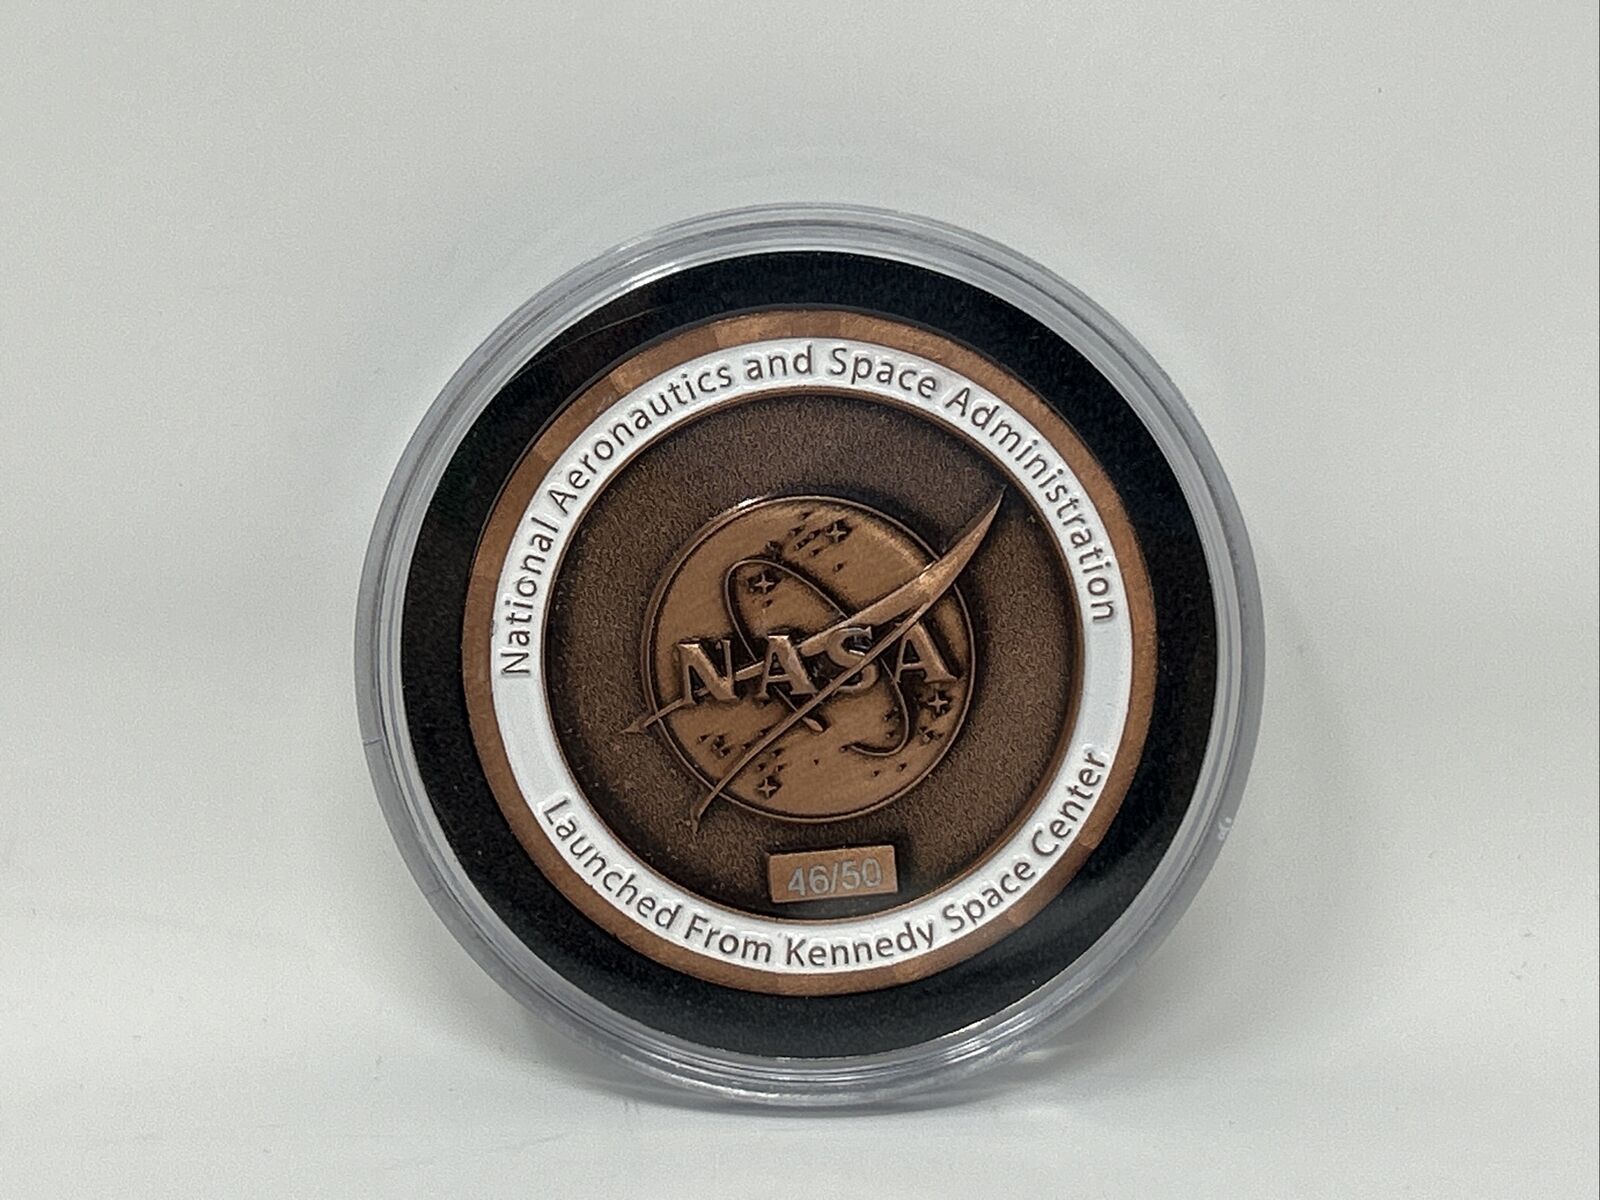 SpaceX Crew-8 Mission *Limited Edition* Coin, Serialized/Stamped: 46/50.